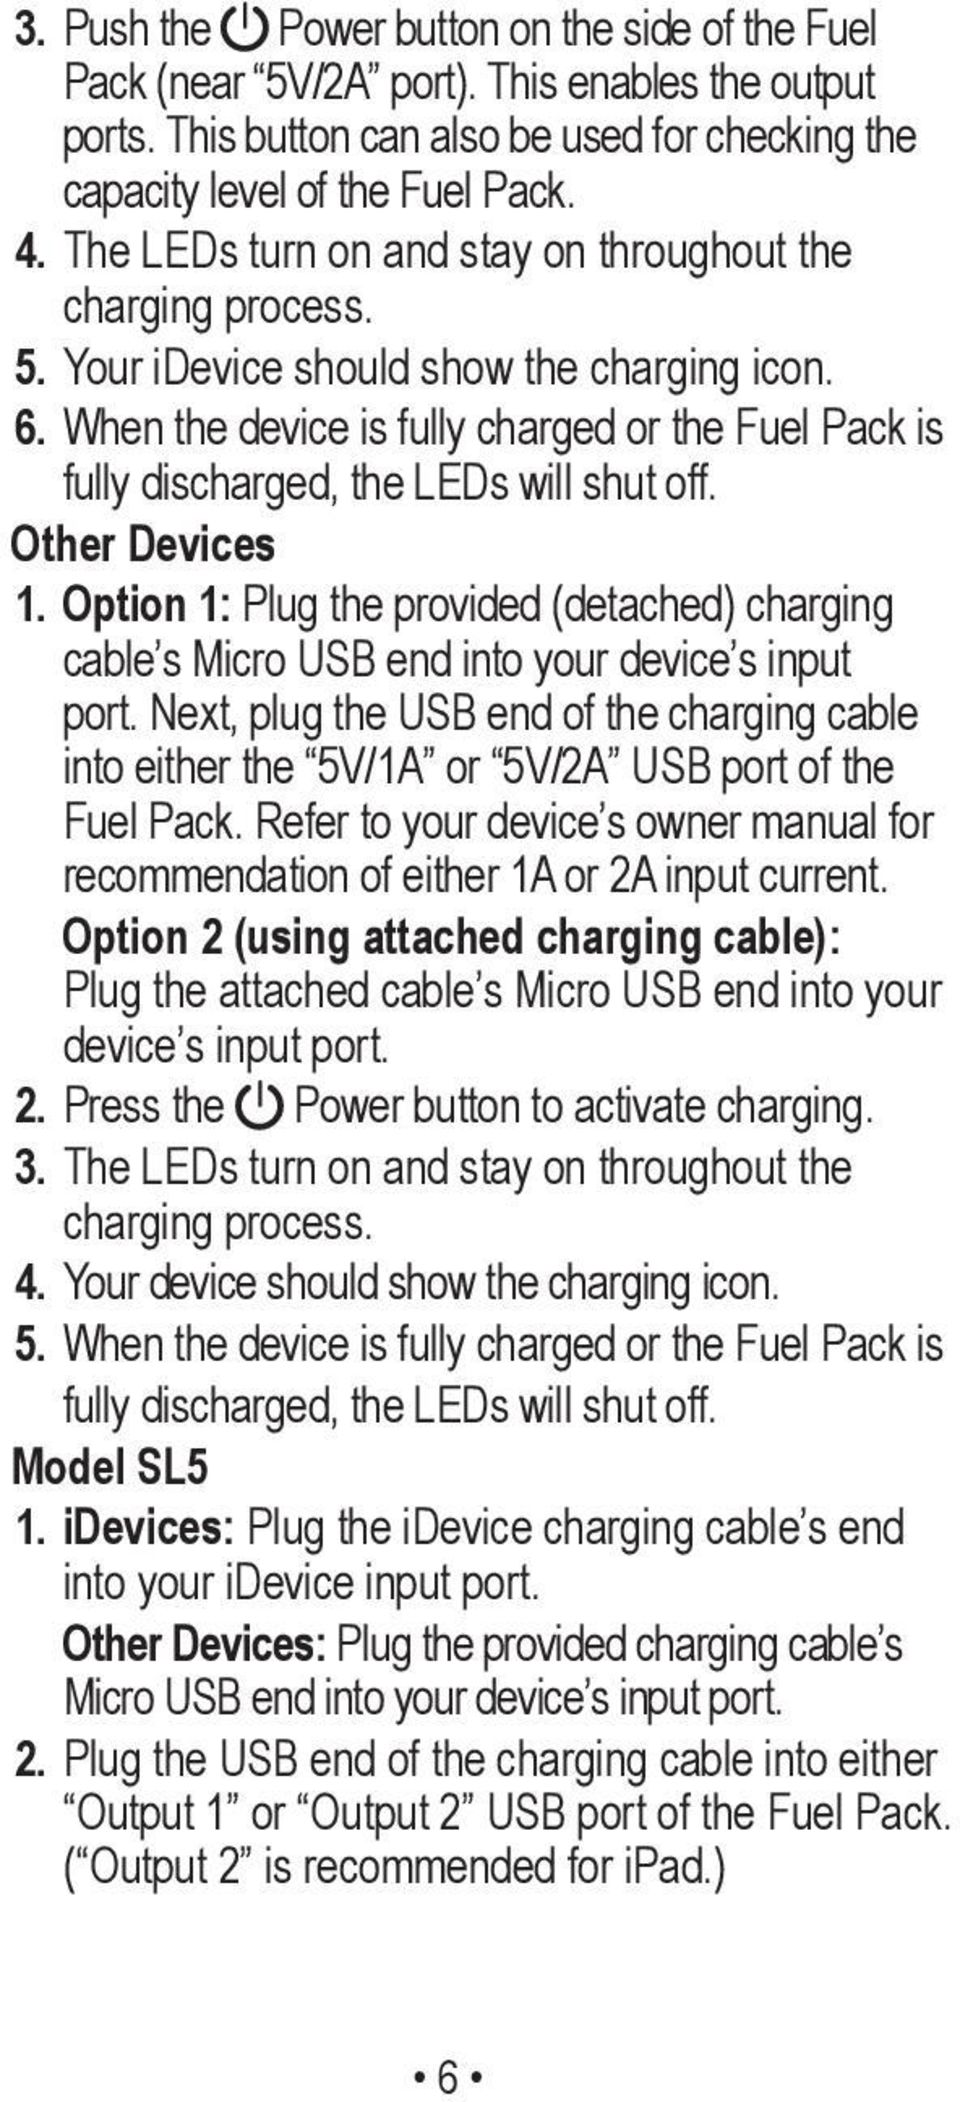 When the device is fully charged or the Fuel Pack is fully discharged, the LEDs will shut off. Other Devices 1.